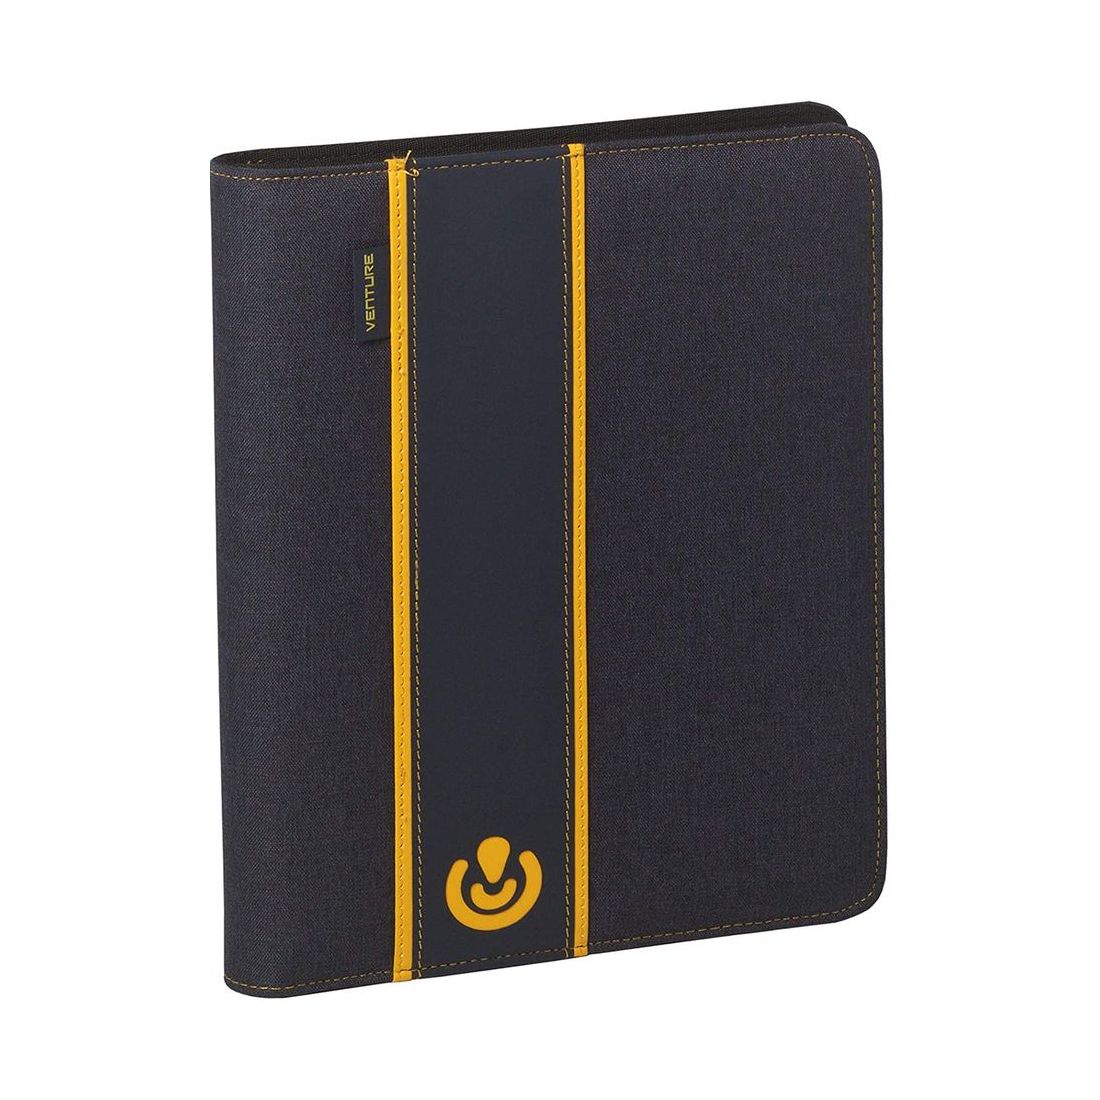 Carchivo Venture A4 Document Holder with Tablet Compartment - Blue/Yellow